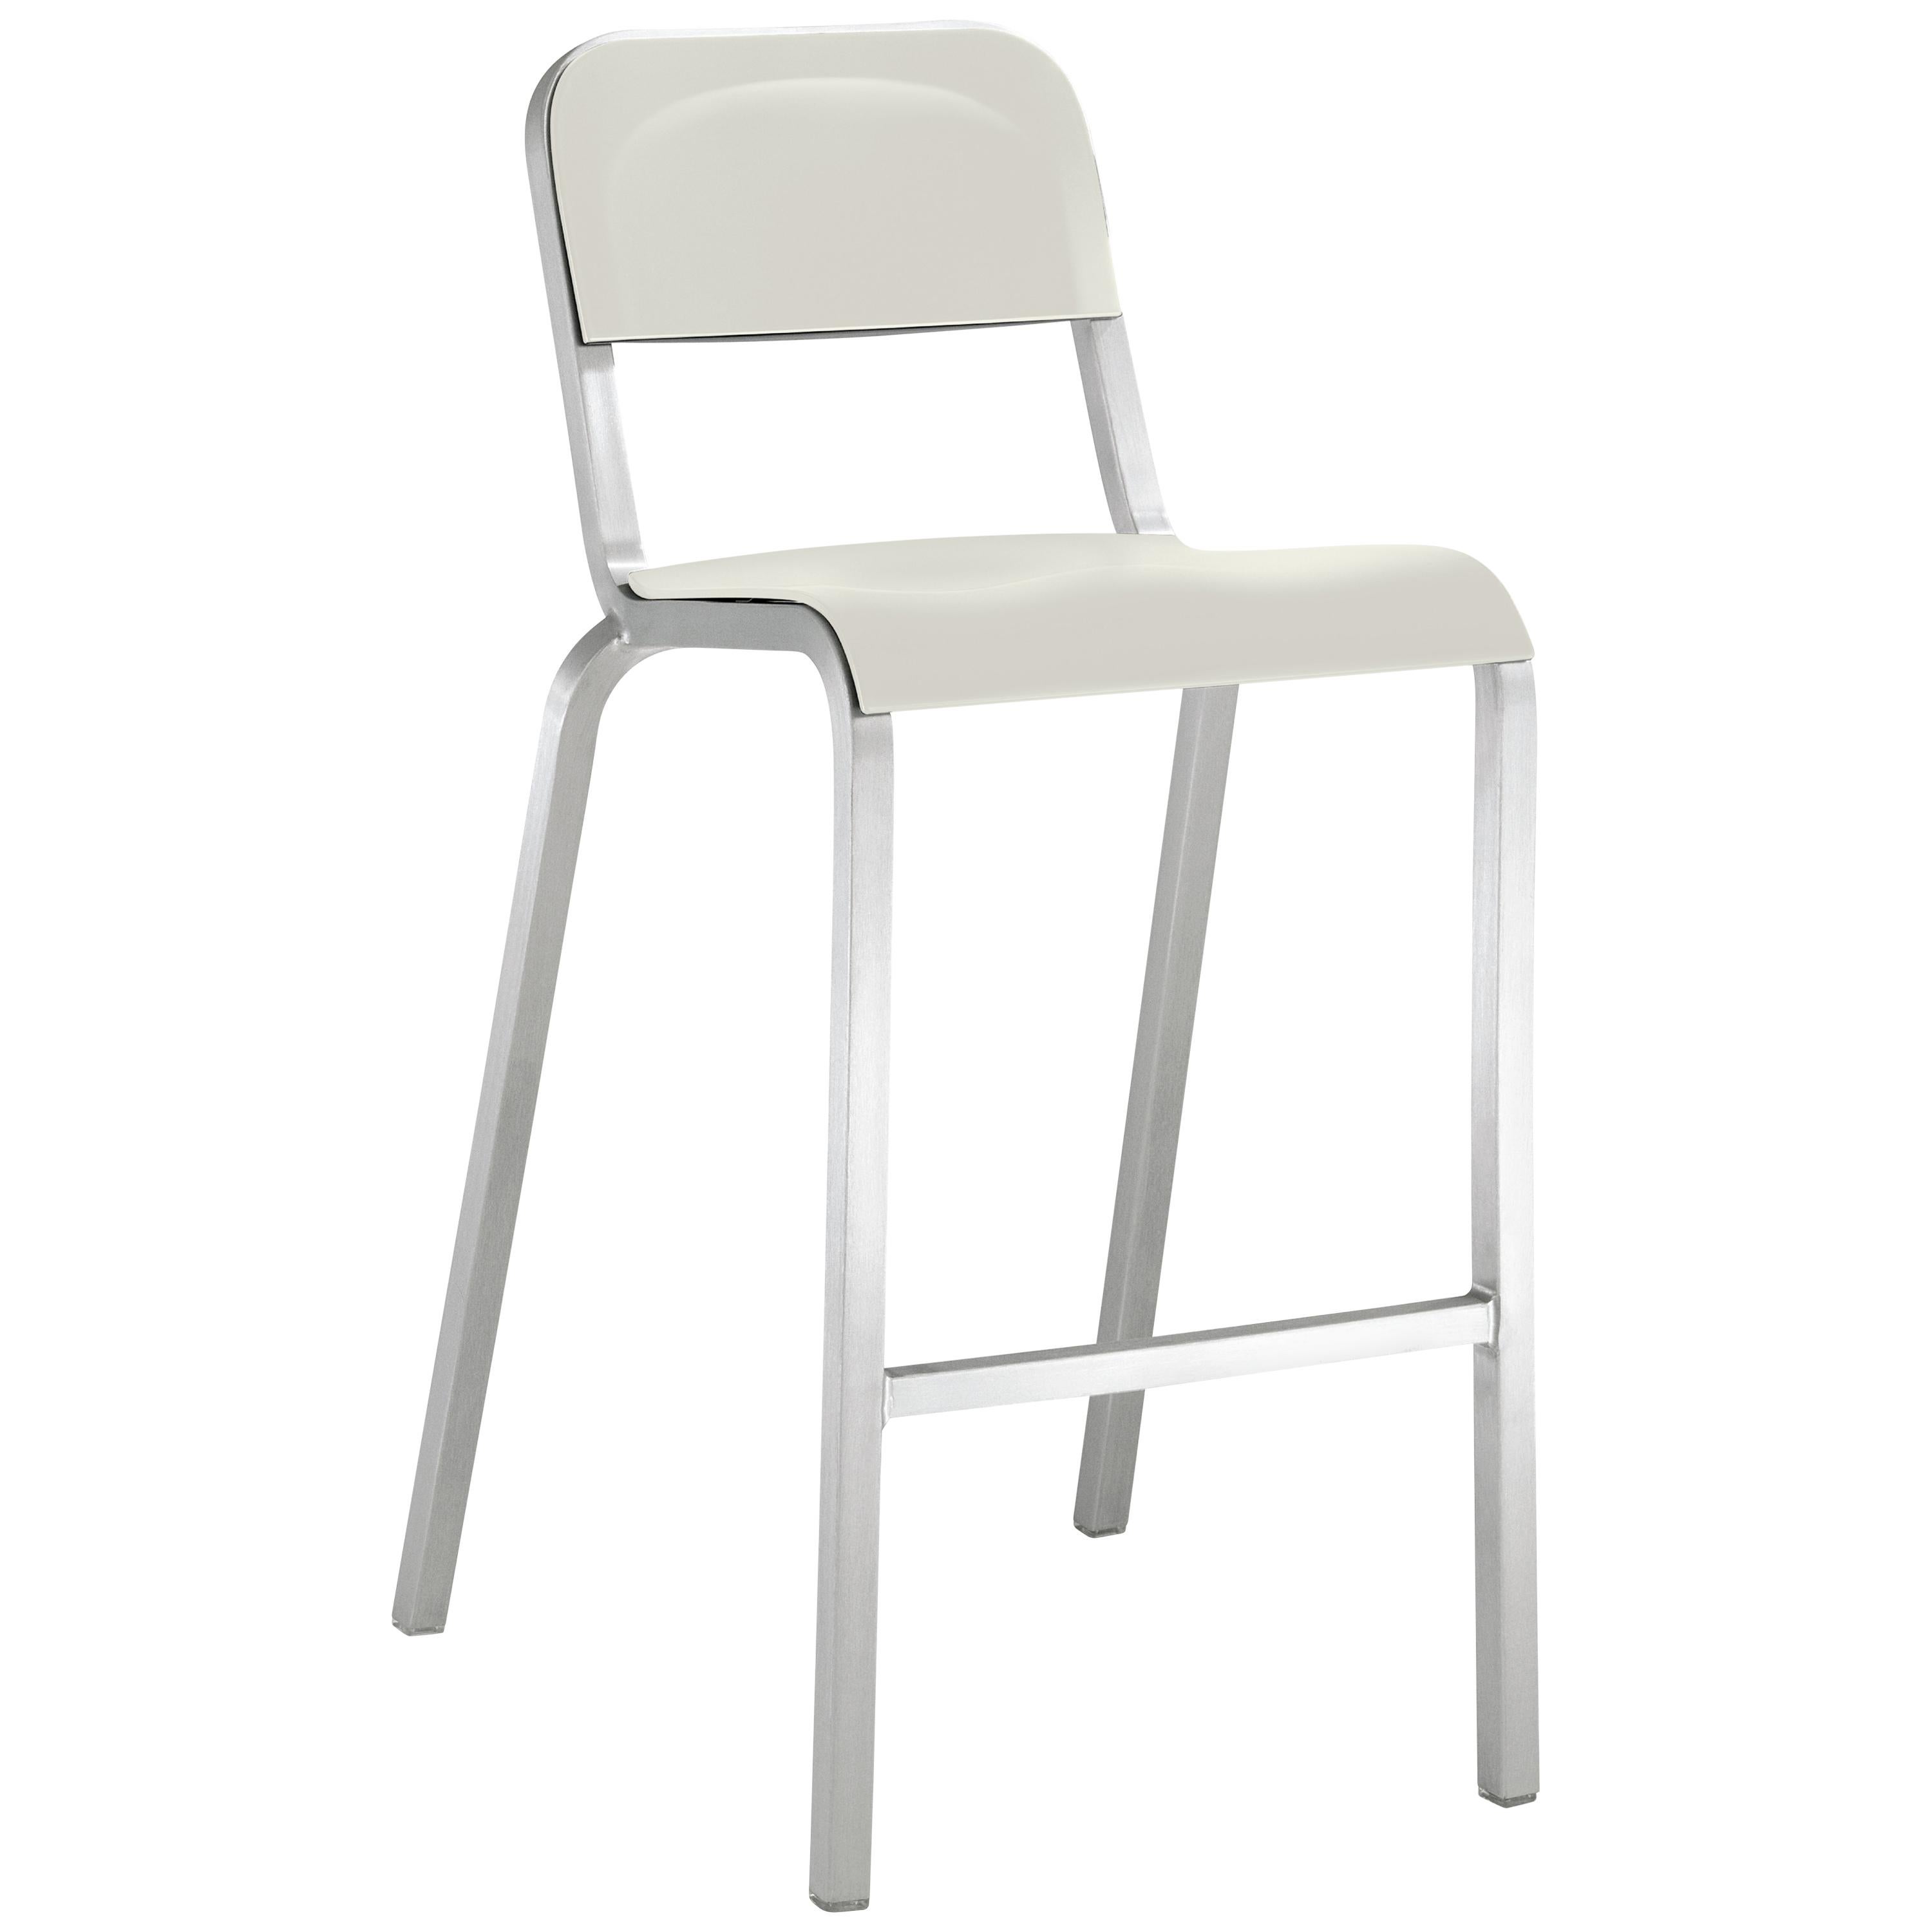 Emeco 1951 Aluminum Barstool with Stockholm White Seat by Adrian Van Hooydonk For Sale